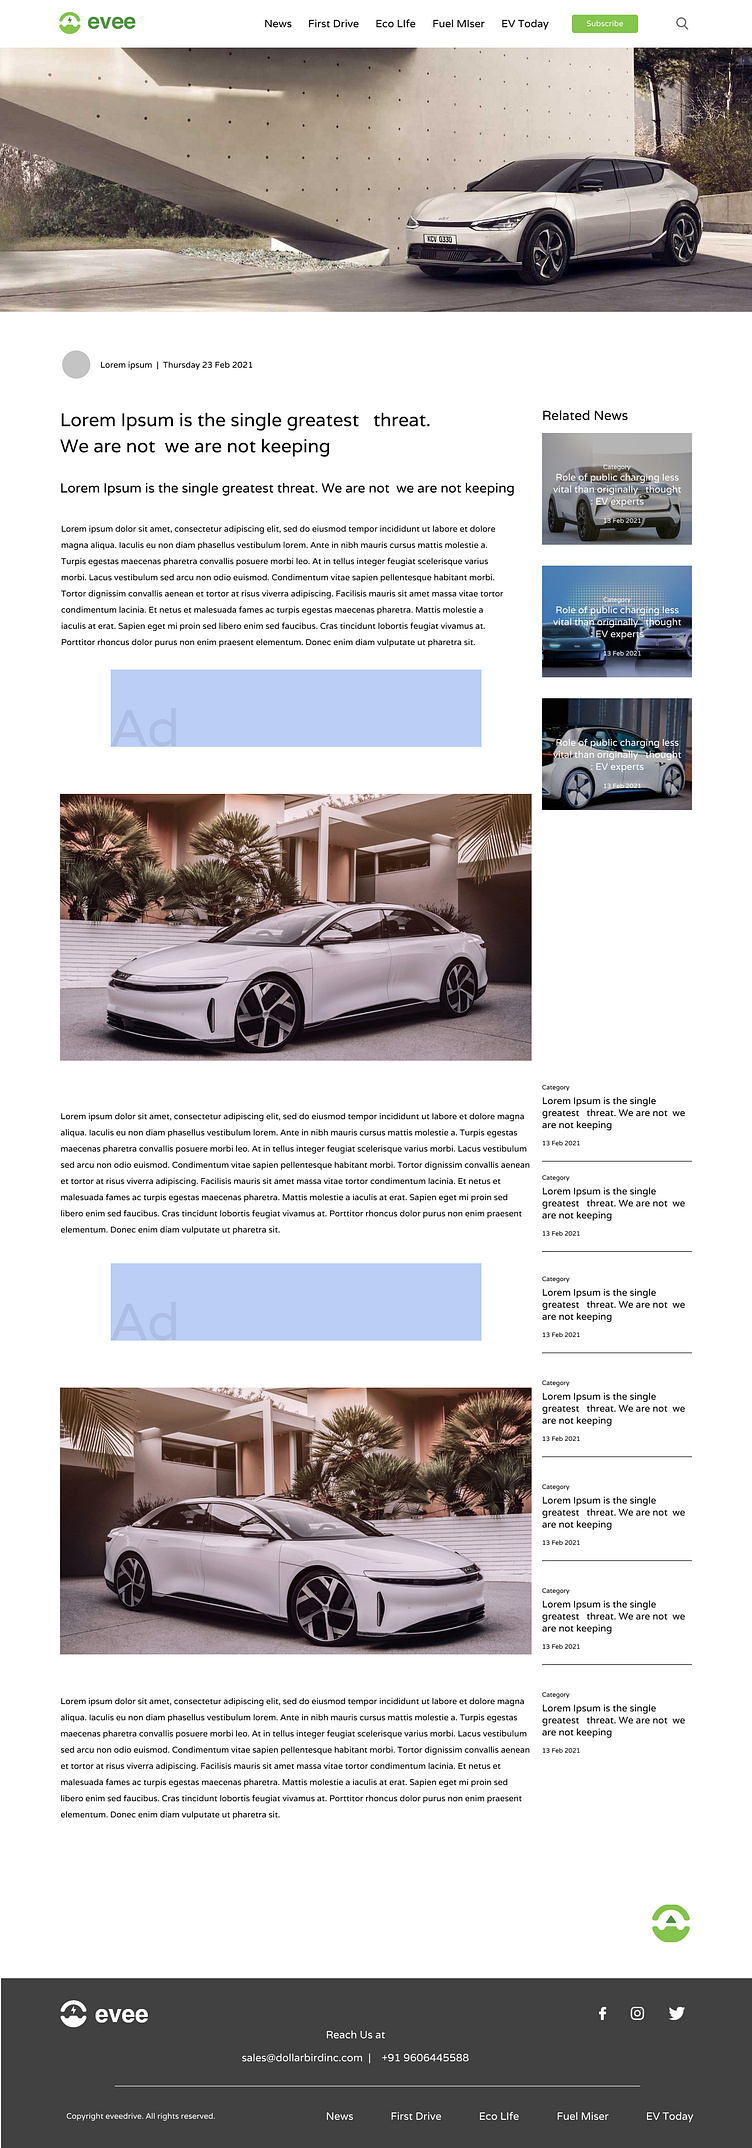 Evee Electric vehicle blog website by Dollarbird Design on Dribbble